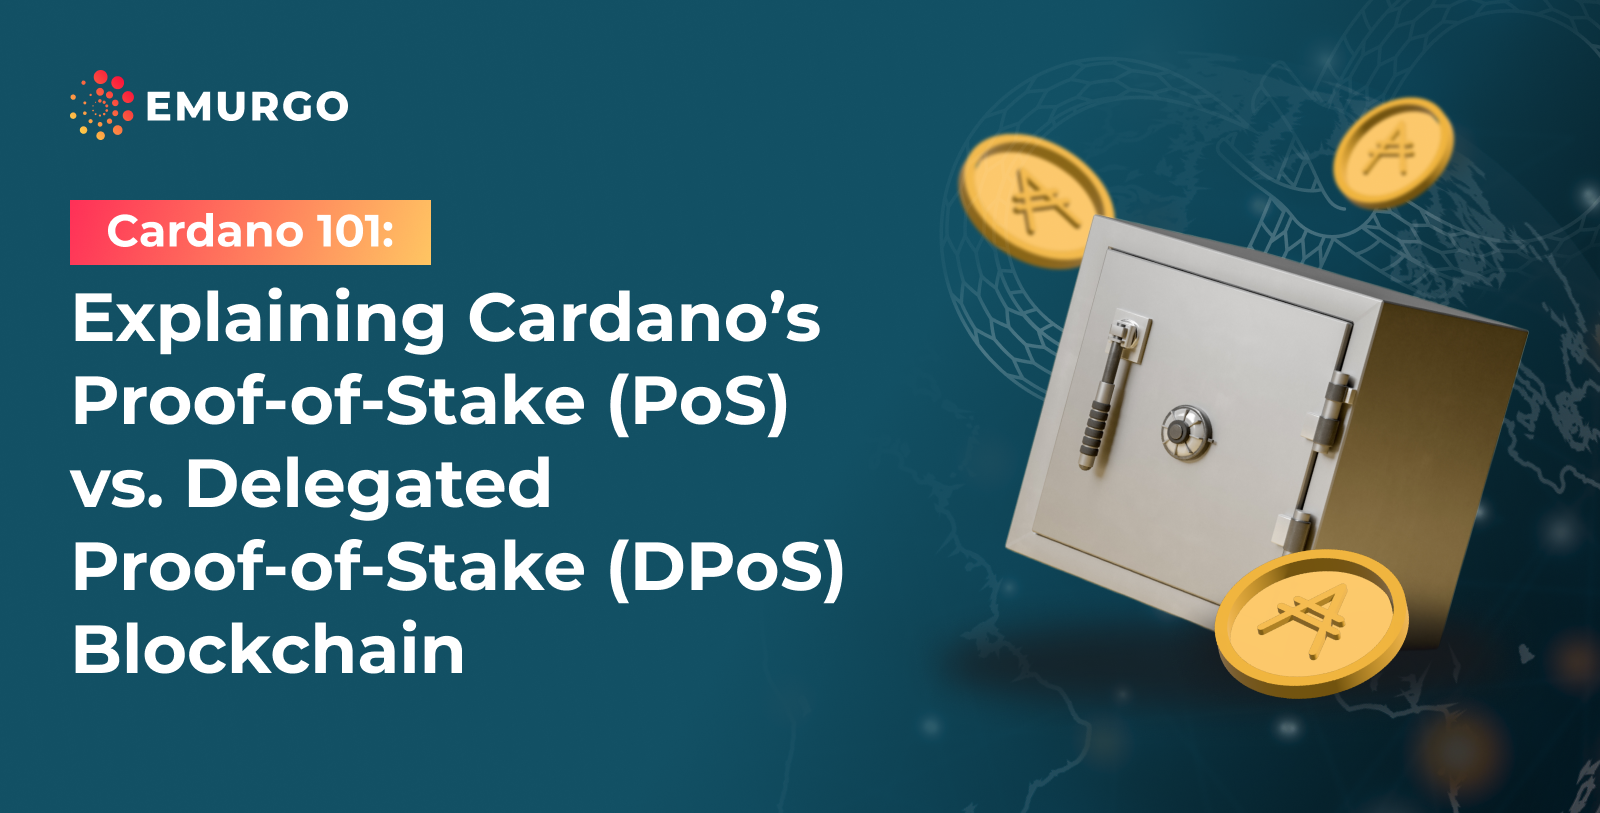 Cardano-101_-Explaining-Cardanos-Proof-of-Stake-PoS-vs.-Delegated-Proof-of-Stake-DPoS-Blockchain.png